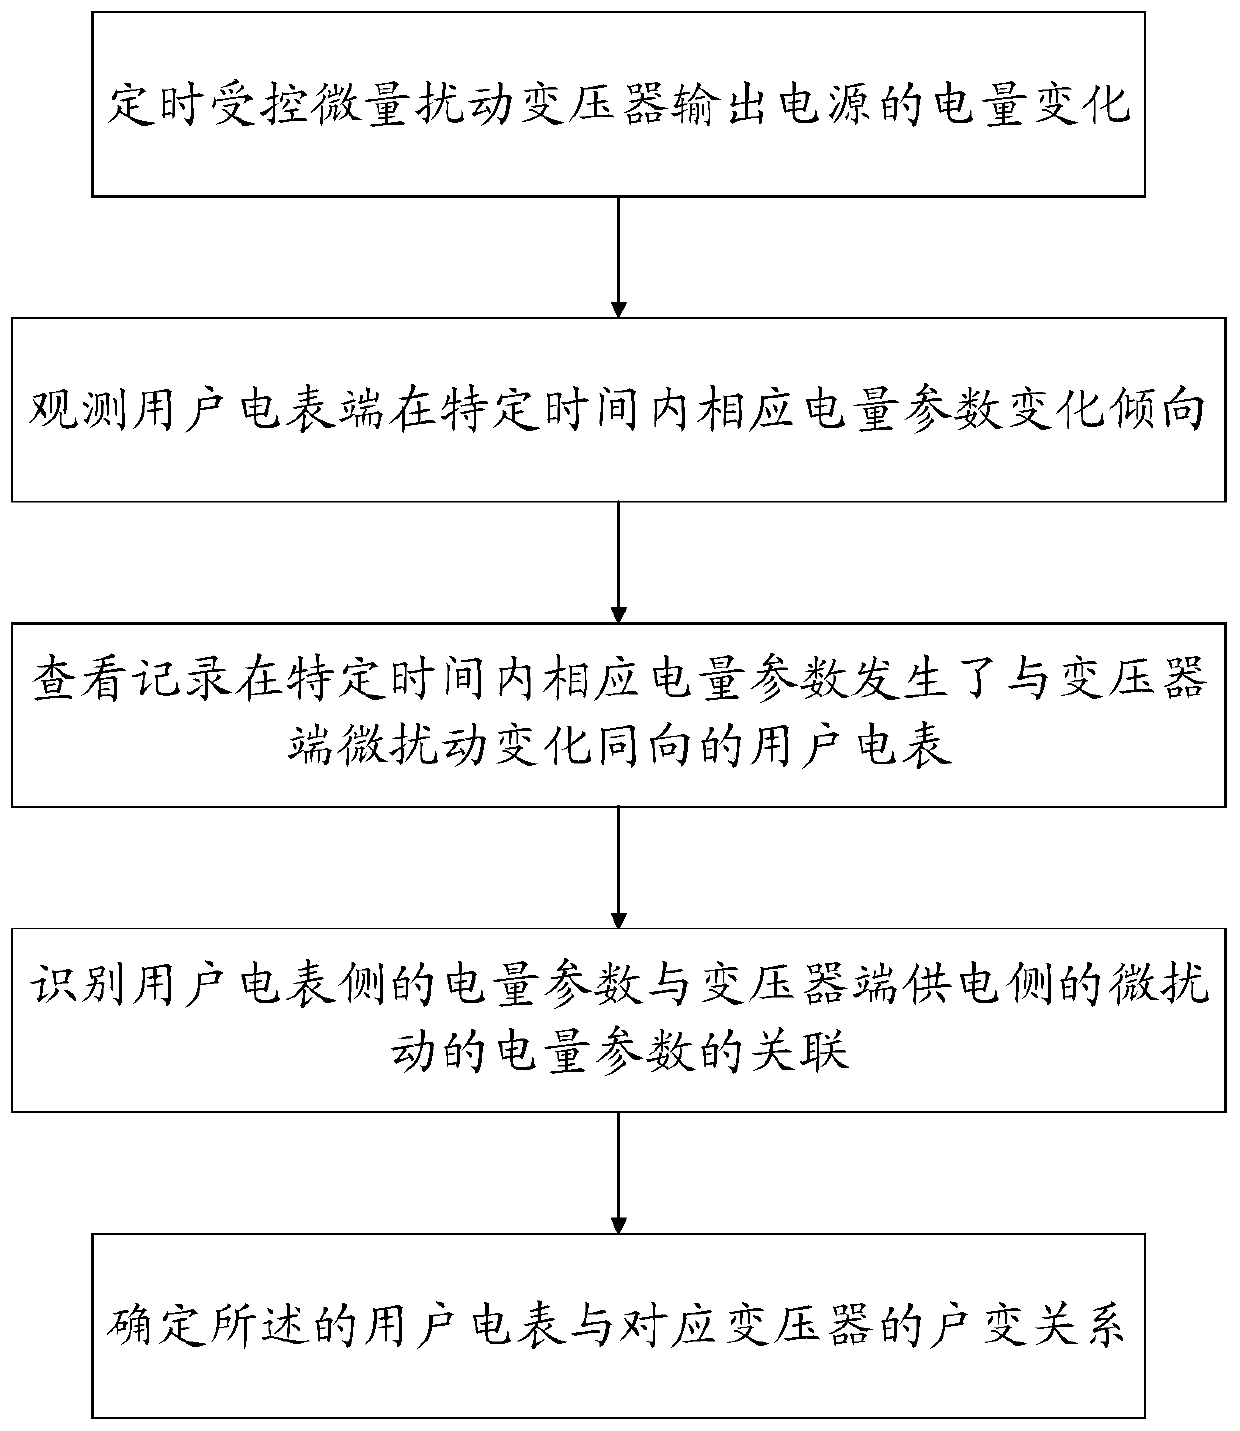 Power supply side perturbation-based power grid user and transformer relation online dynamic supervision system and method